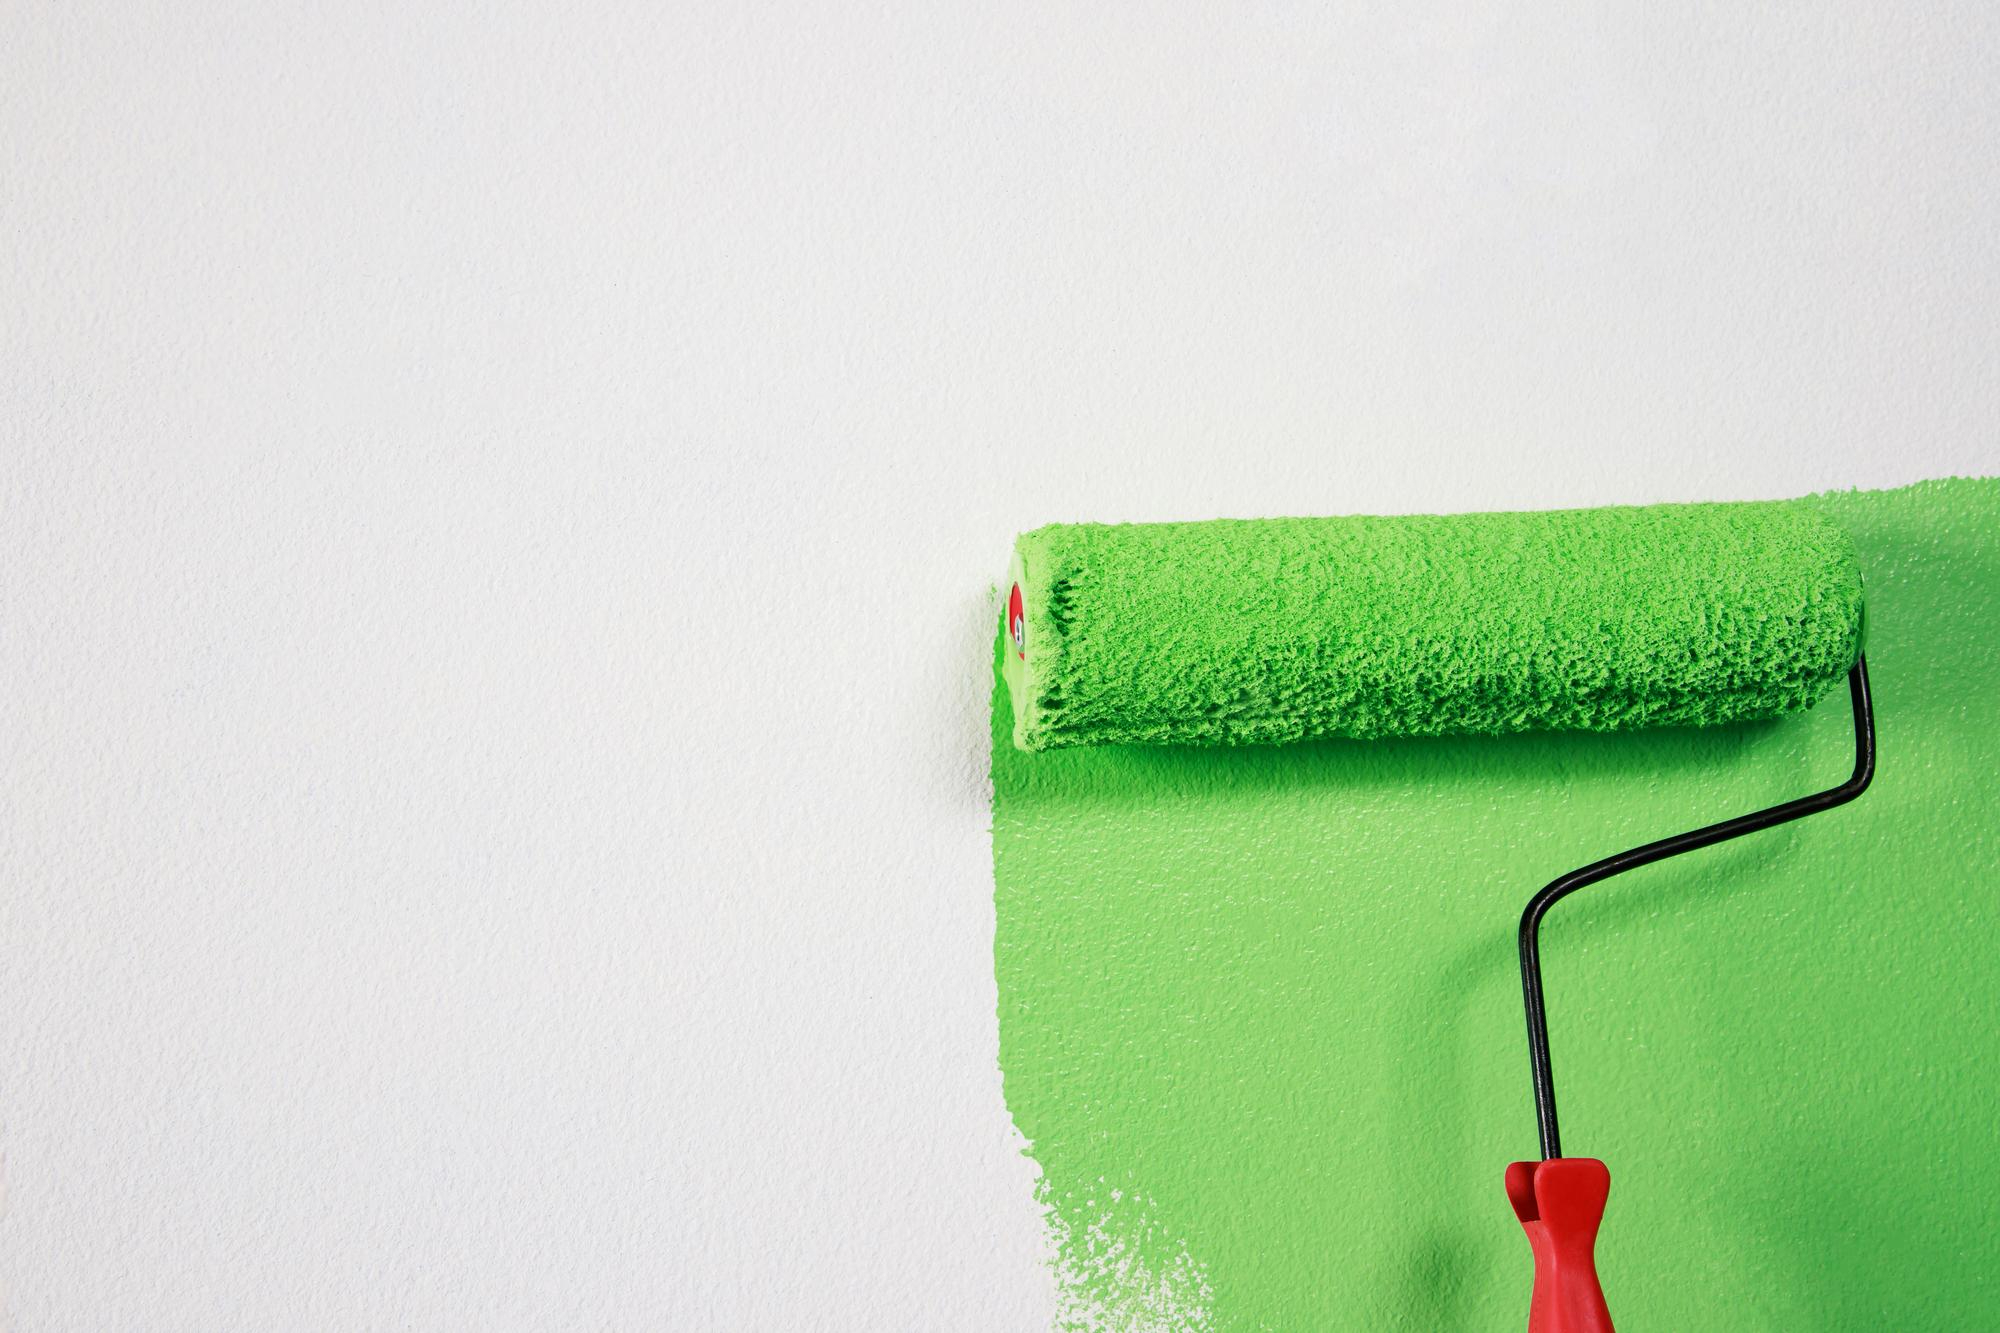 roller-brush-painting-worker-painting-surface-wall-painting-apartment-renovating-with-green-color-paint